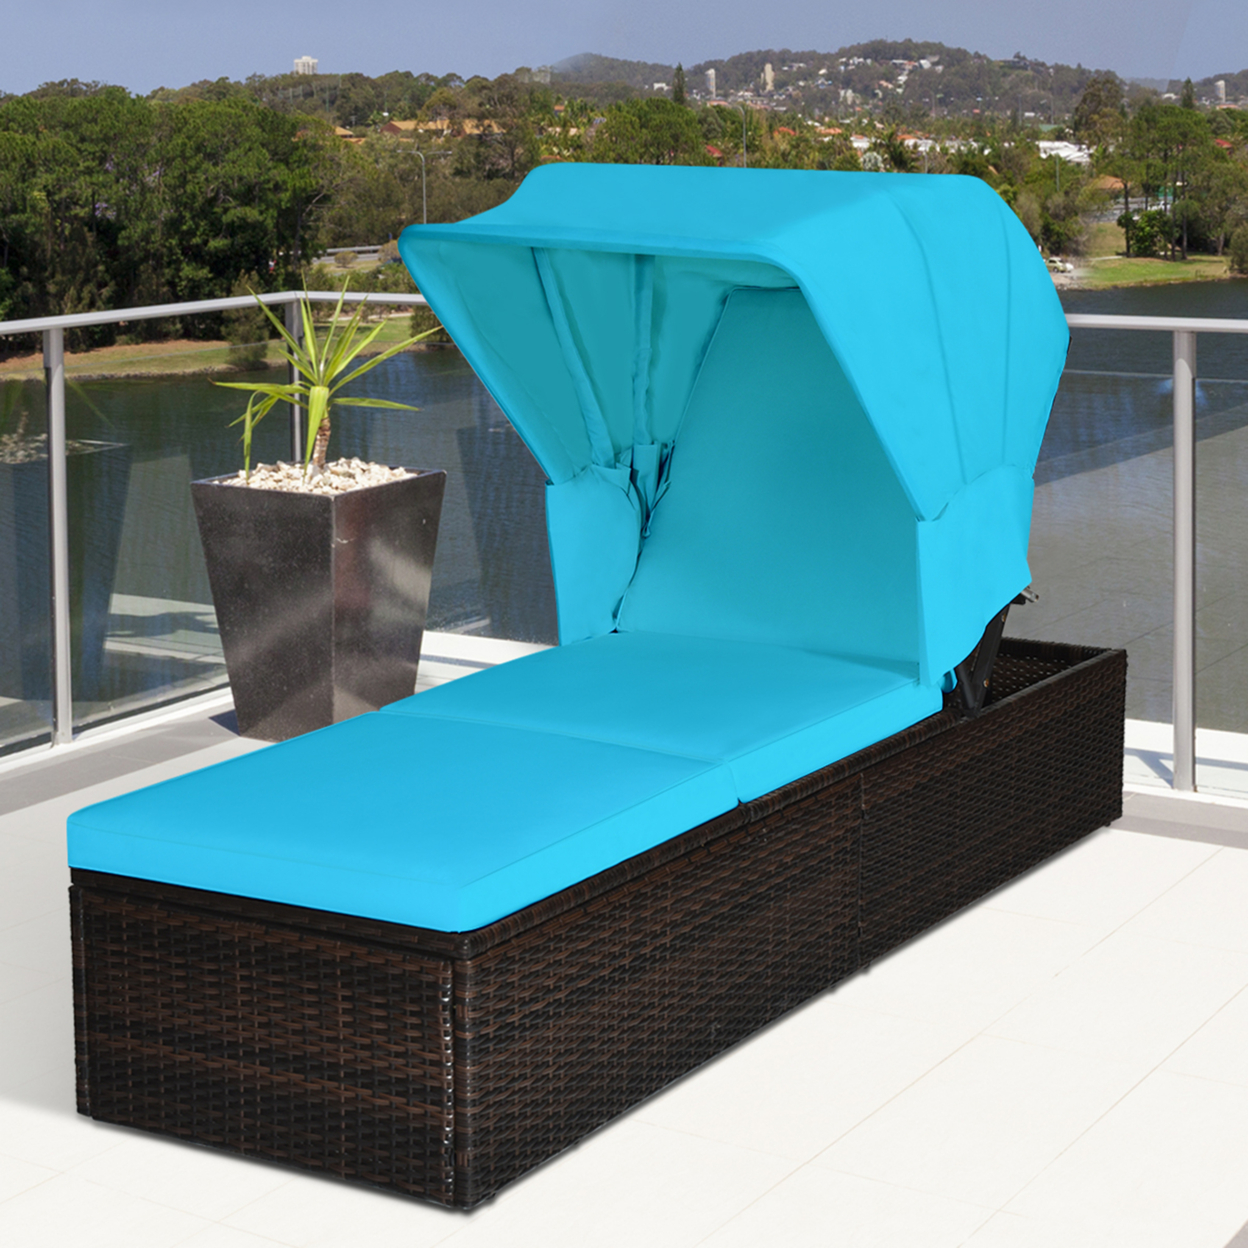 2PCS Rattan Patio Chaise Lounge Chair W/ Adjustable Canopy Turquoise Cushion